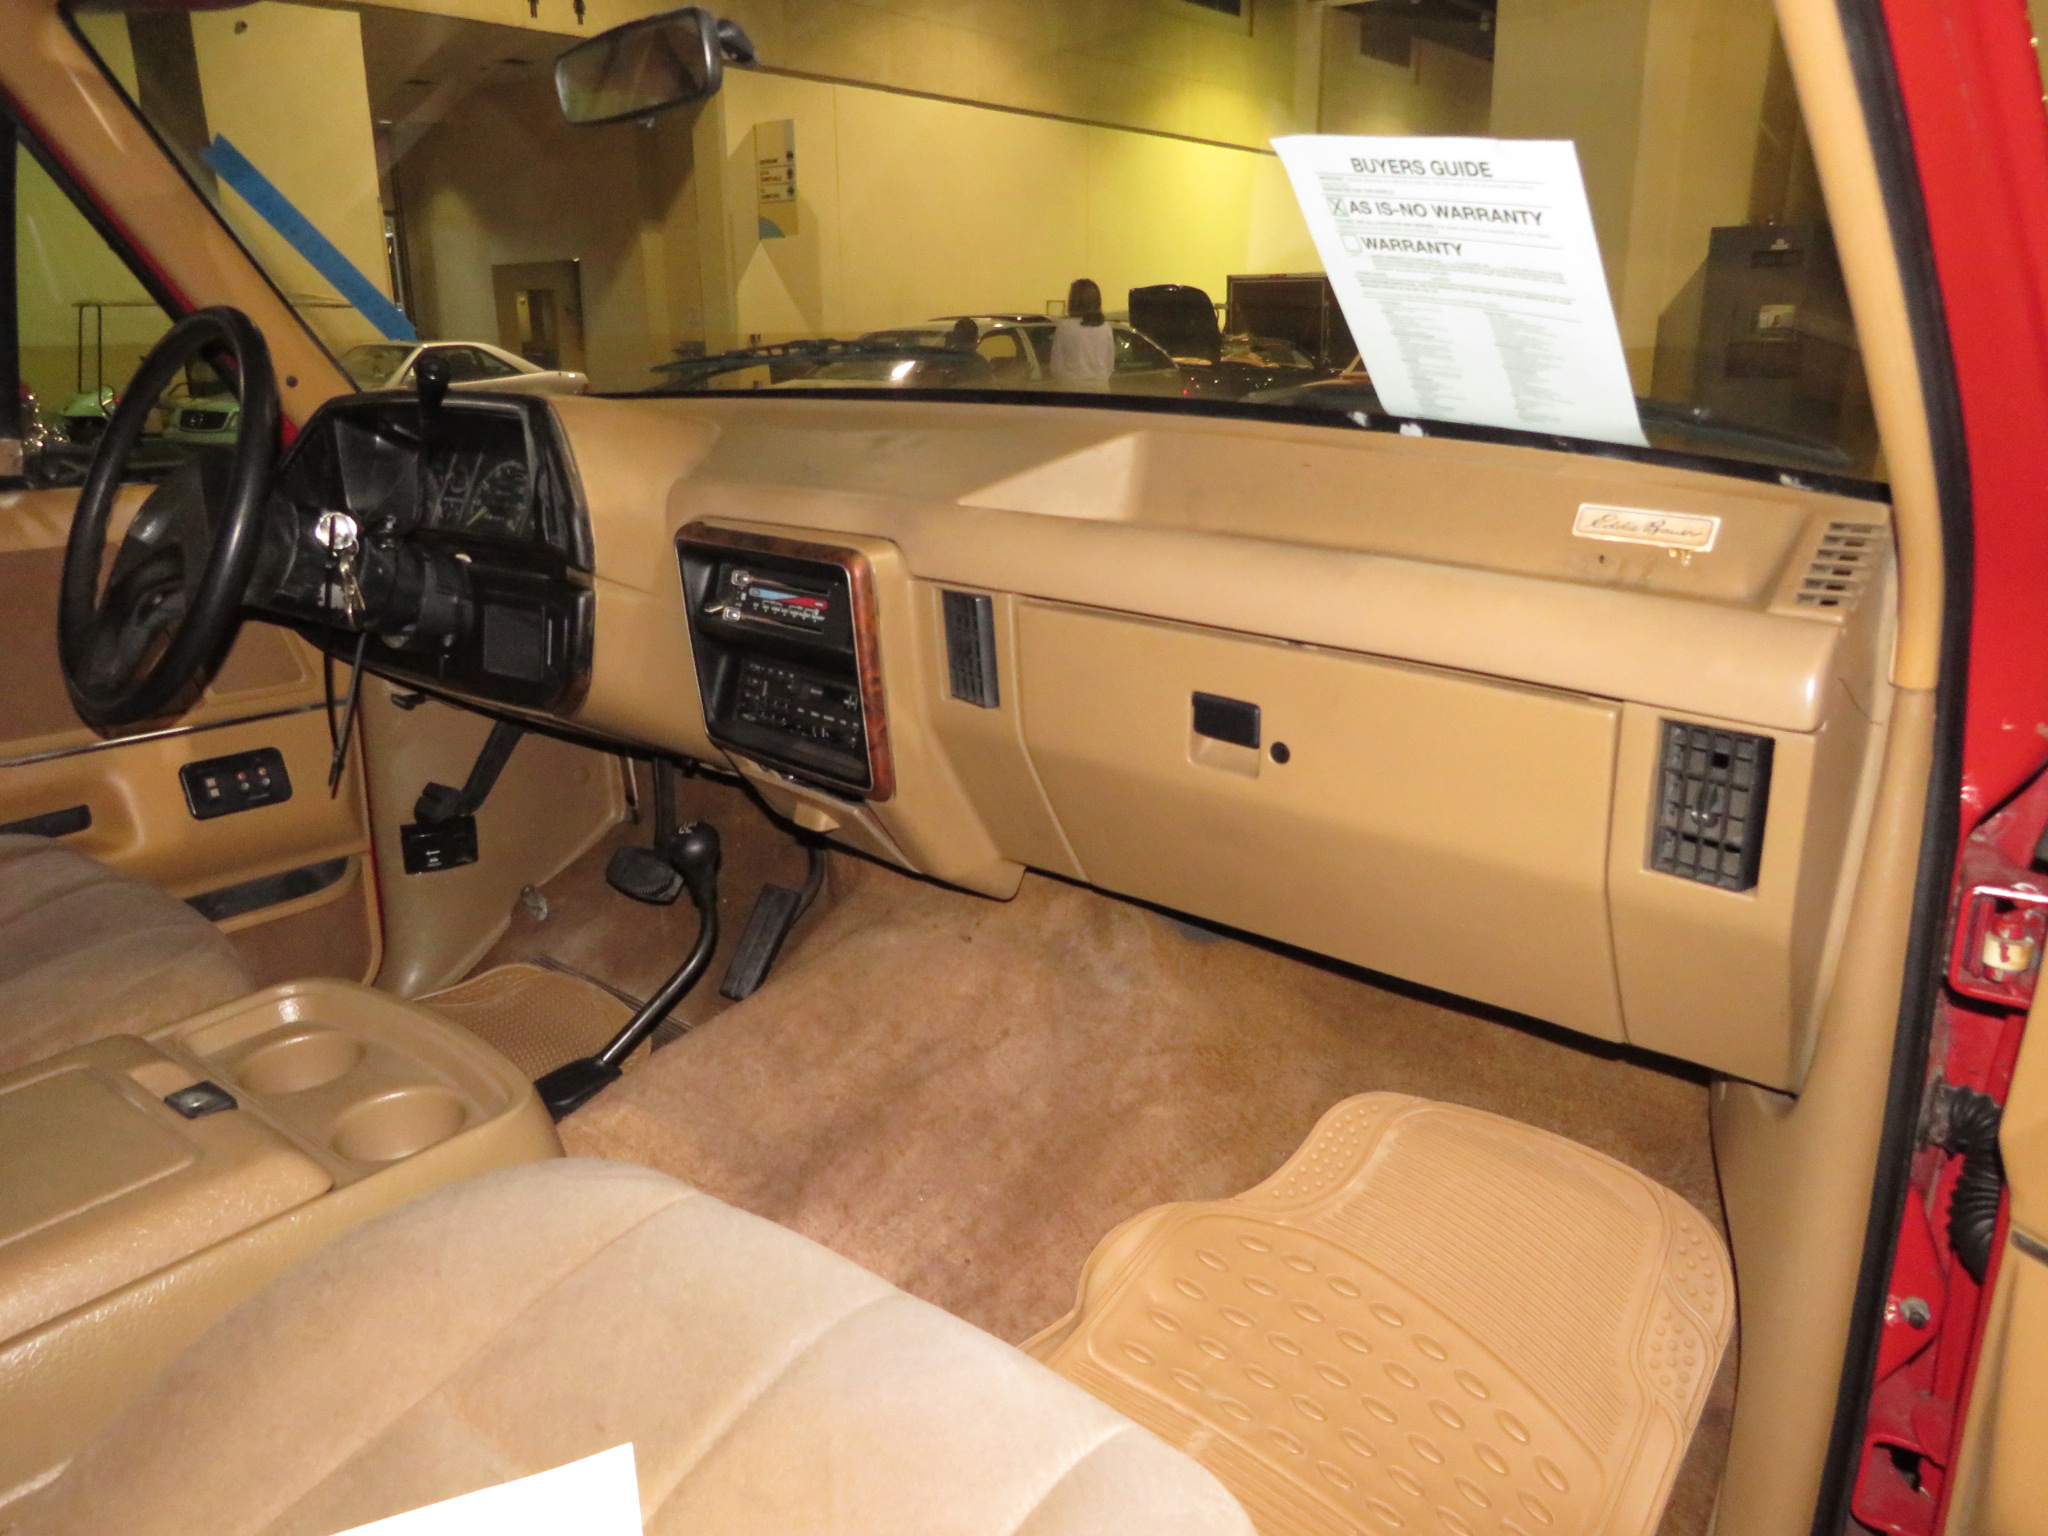 6th Image of a 1989 FORD BRONCO XLT